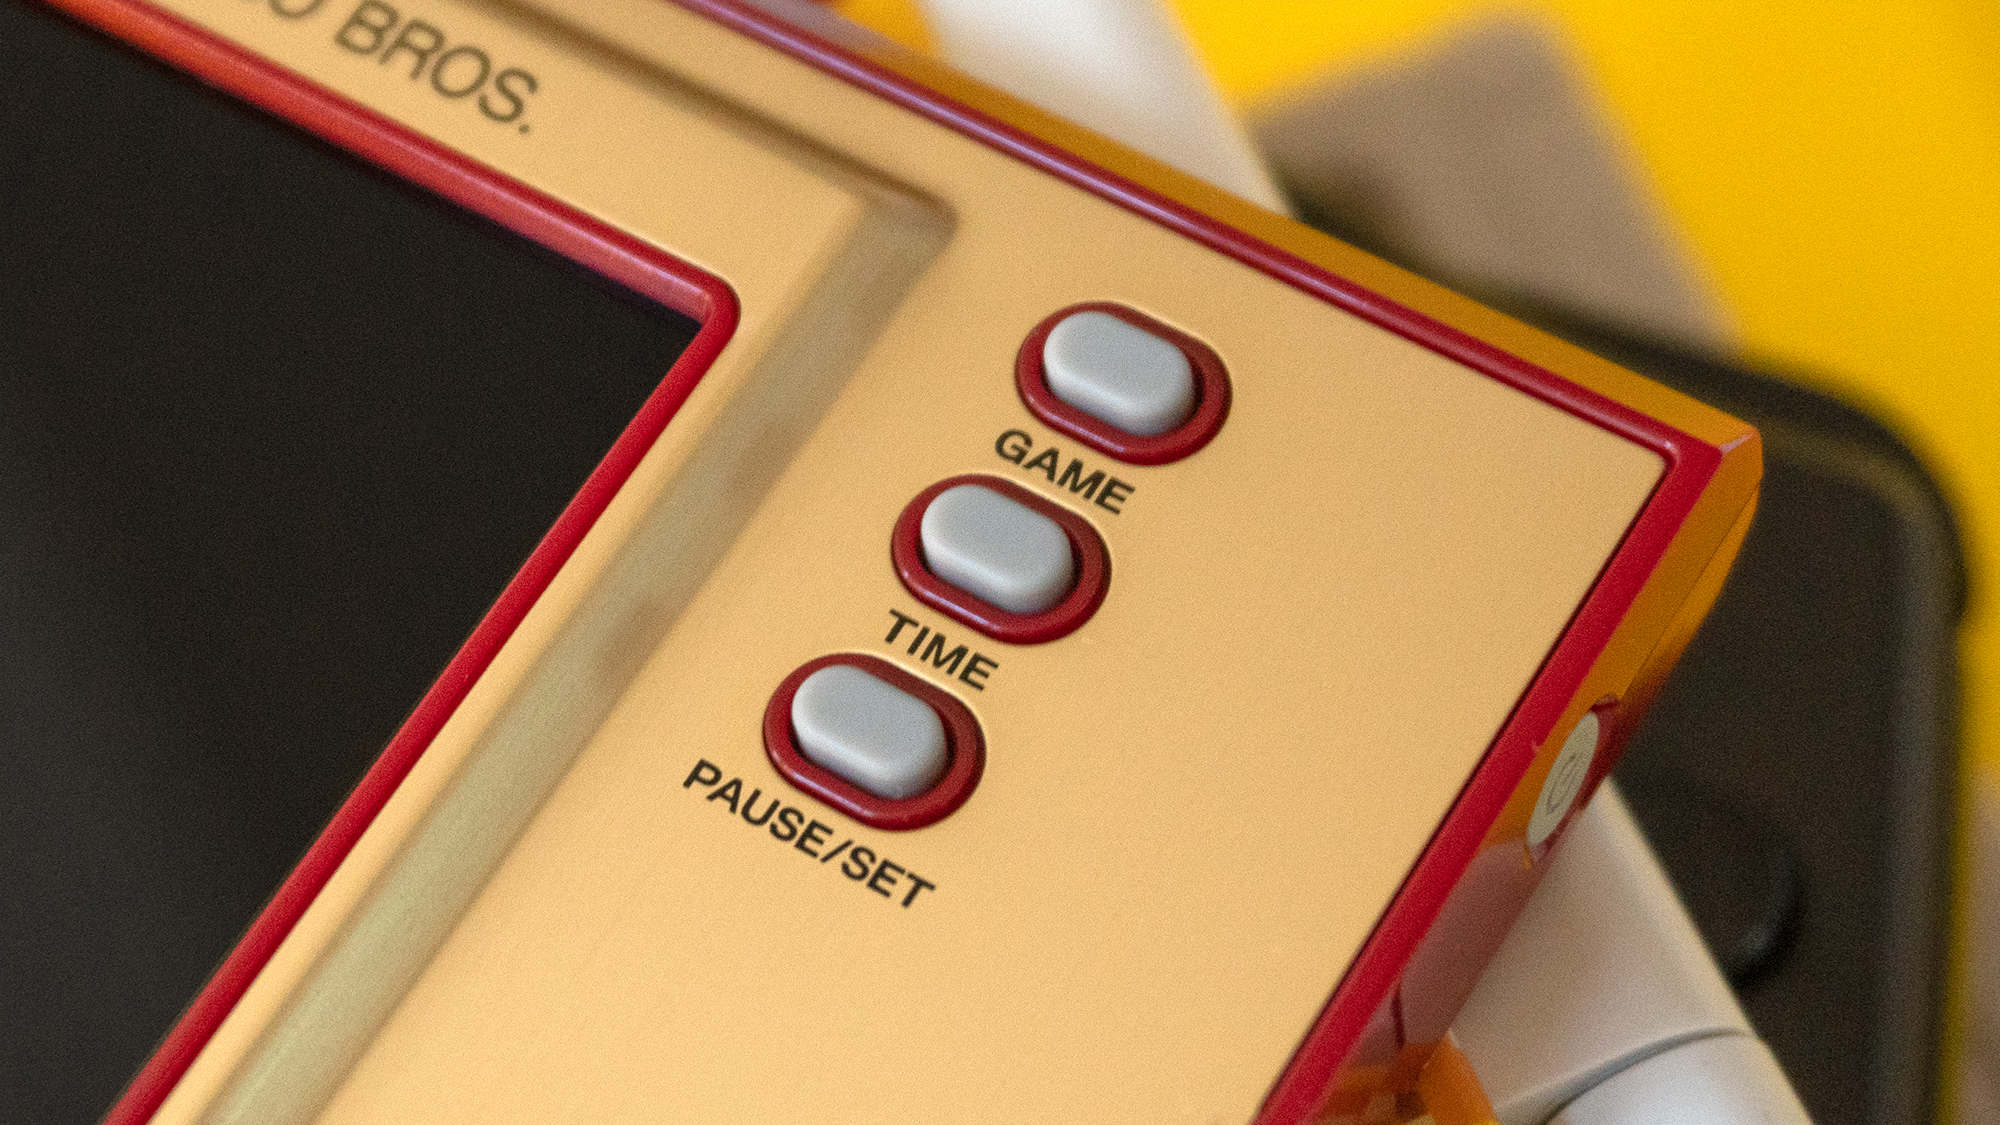 The menu options on the Game & Watch are basic, so three simple buttons is all you really need to navigate its UI. (Photo: Andrew Liszewski - Gizmodo)